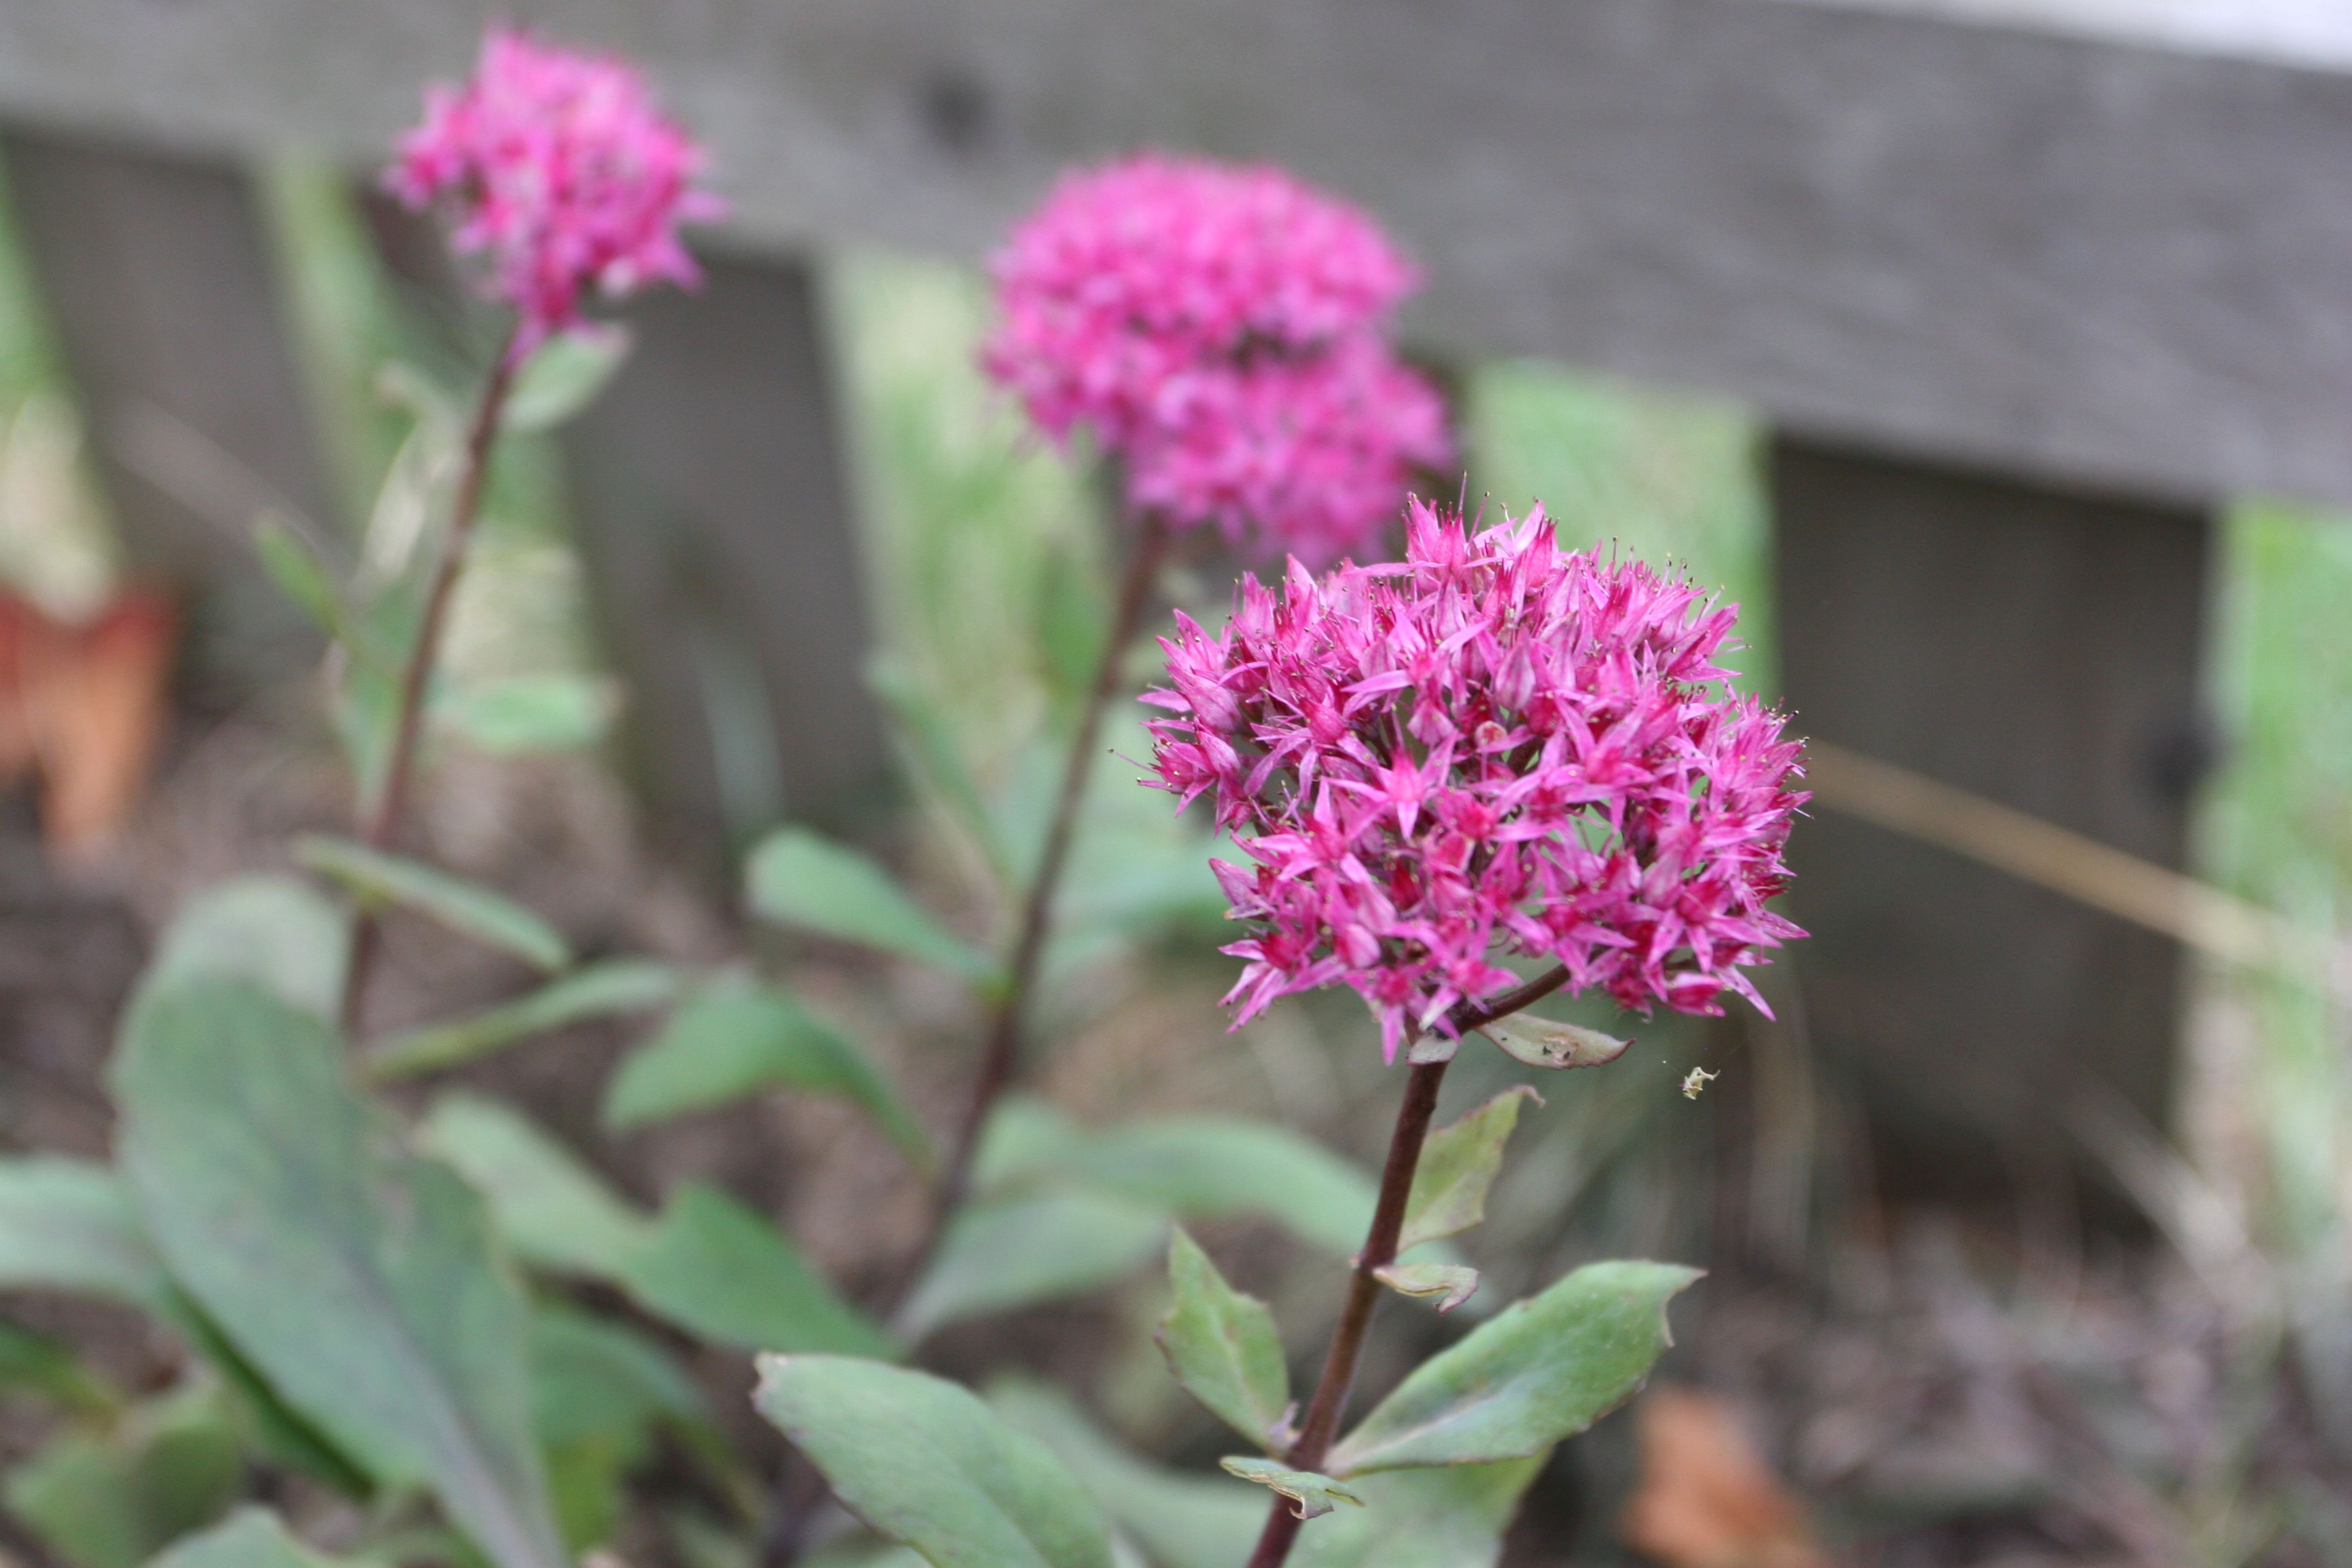 The sedum in full, fall-time bloom. I felt Autumn fall this year. And this year, it hurt.